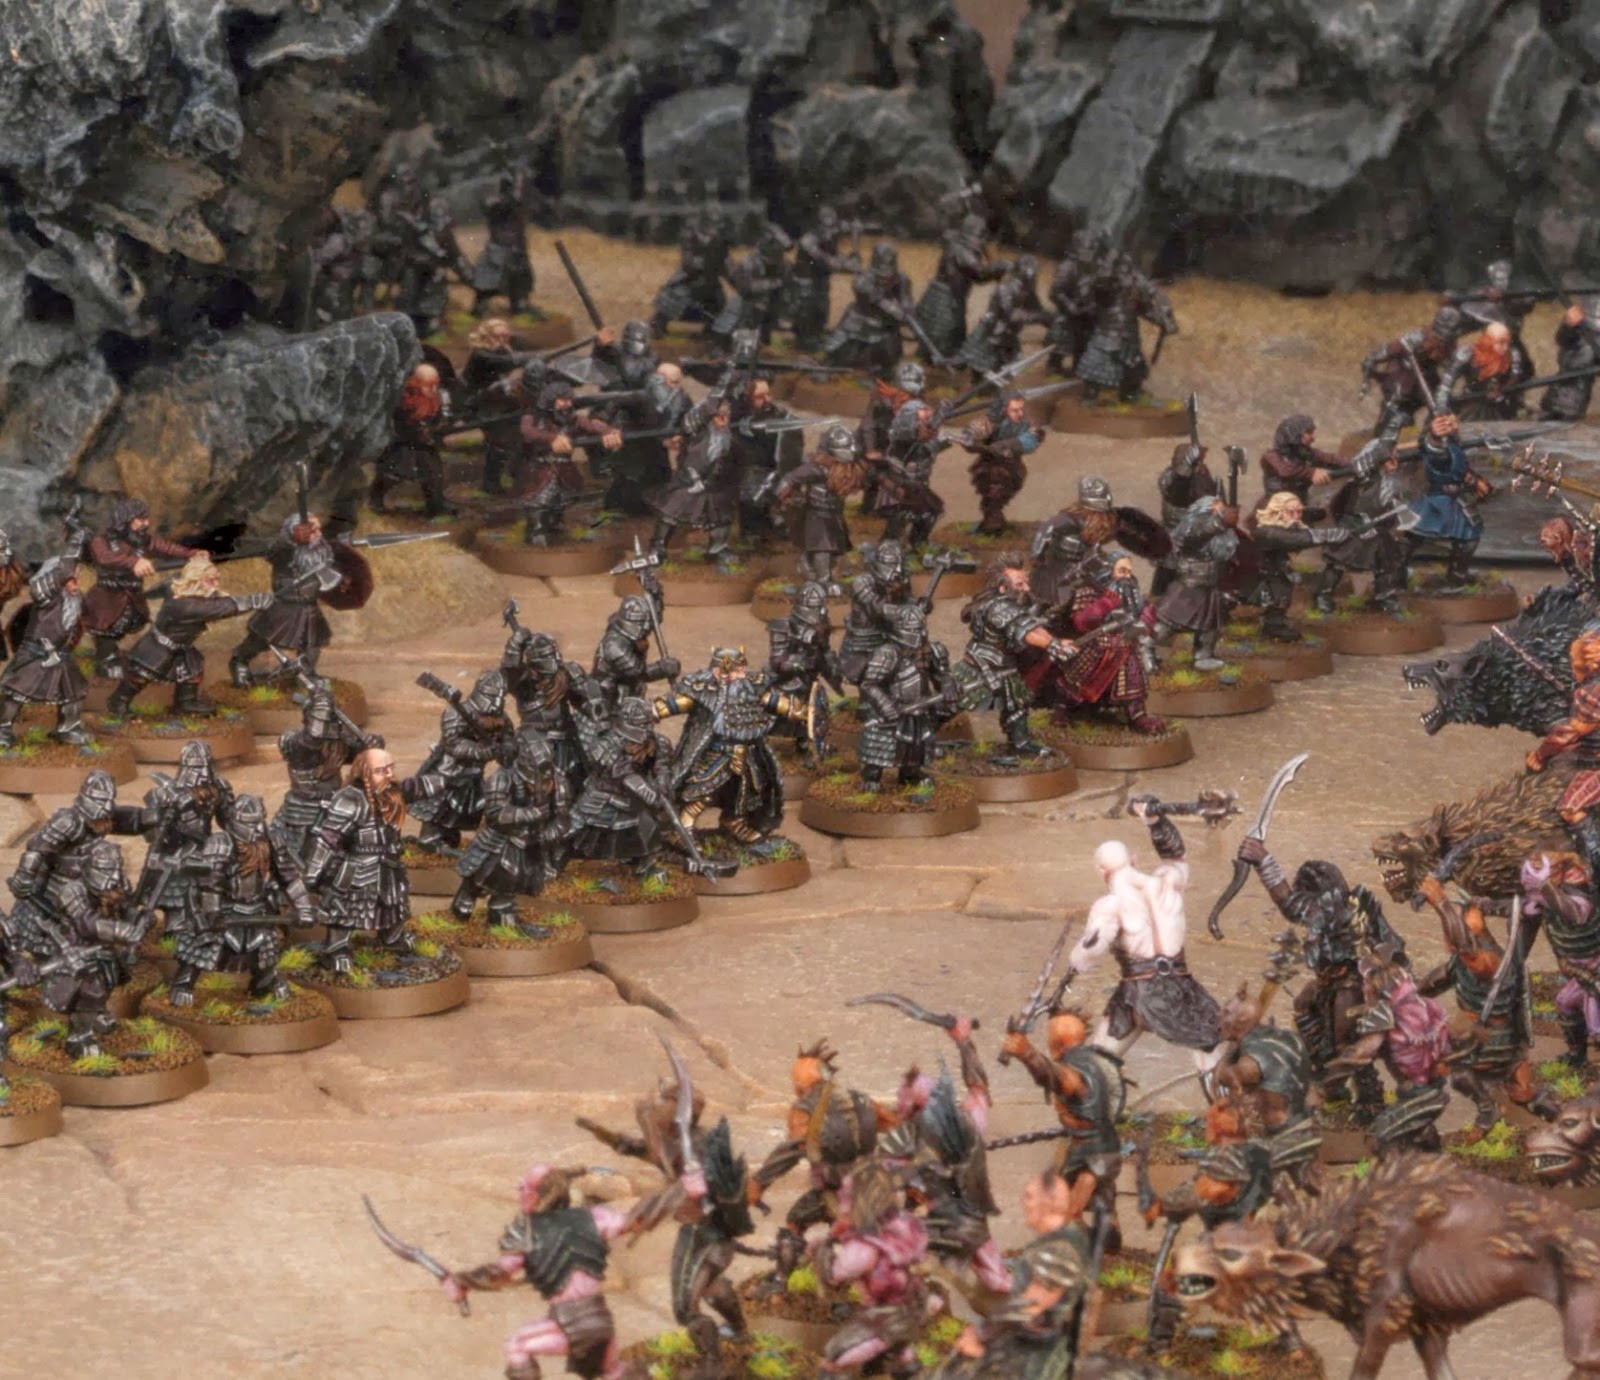 The Lord of the Rings Armies of Middle Earth December 2013